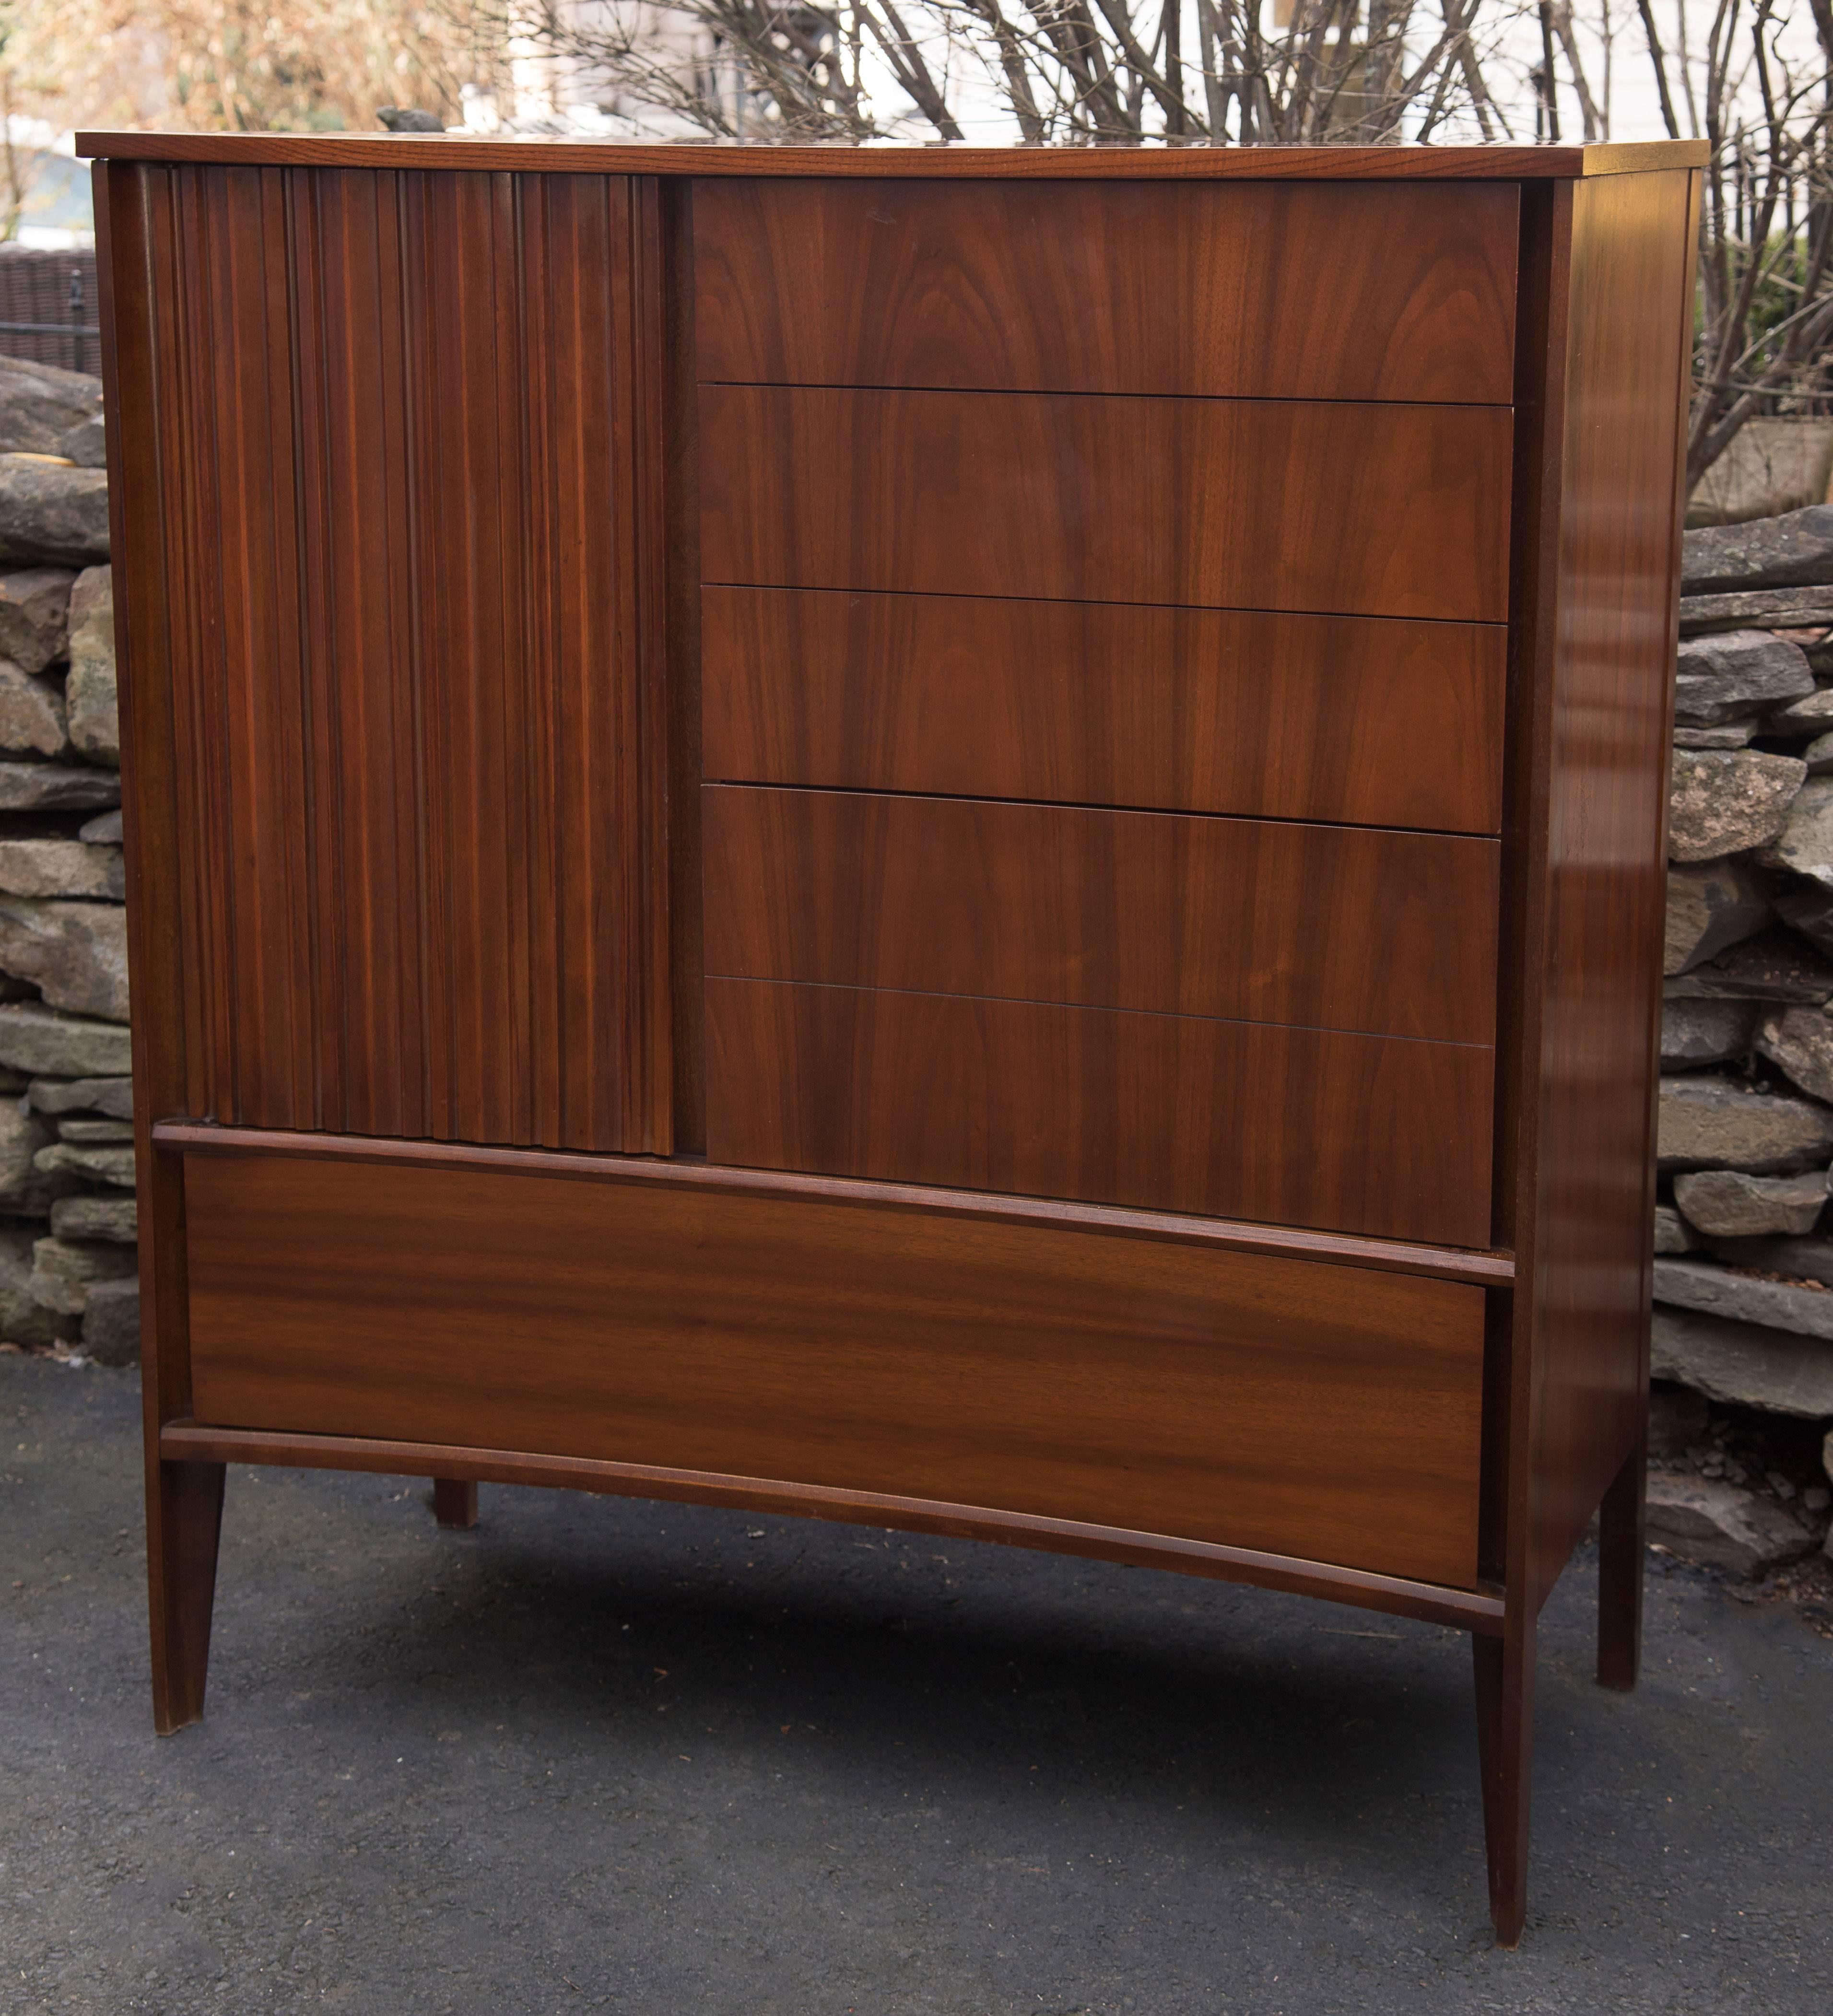 Mid-Century Modern Danish walnut high chest of drawers or dresser by Edmond Spence for Strata having a sleek subtle concave bow shaped silhouette, four stacked drawers on the right that are opened from the sides, a cool accordian shaped door on the